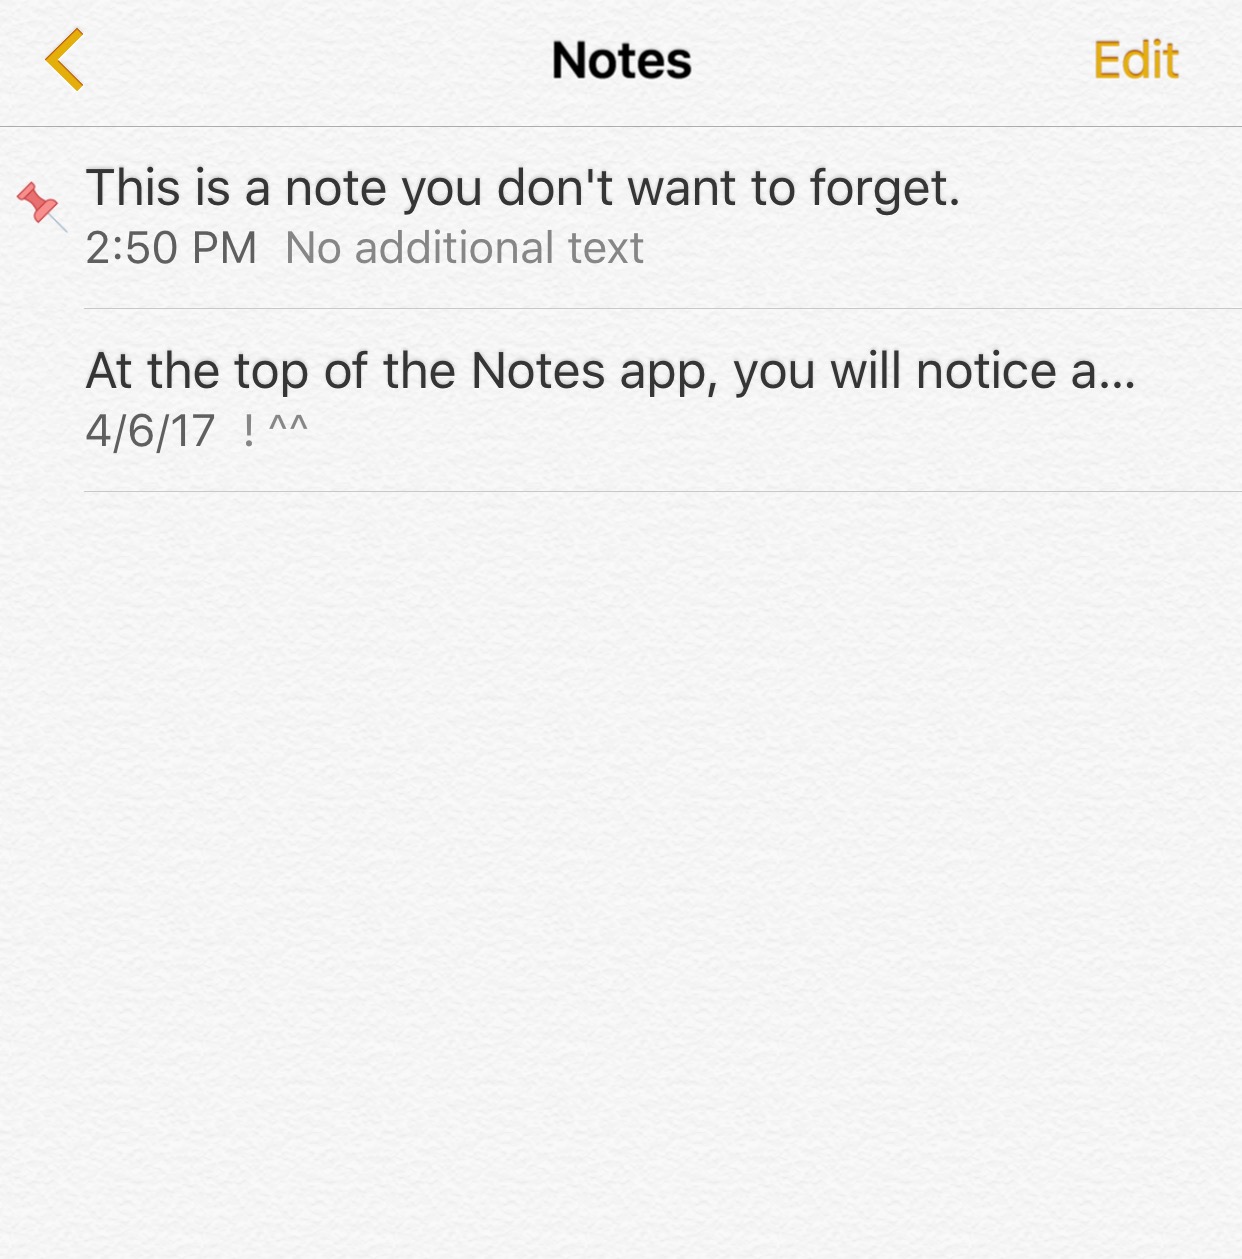 Pin important notes at the top of the Notes app with Thumbtack